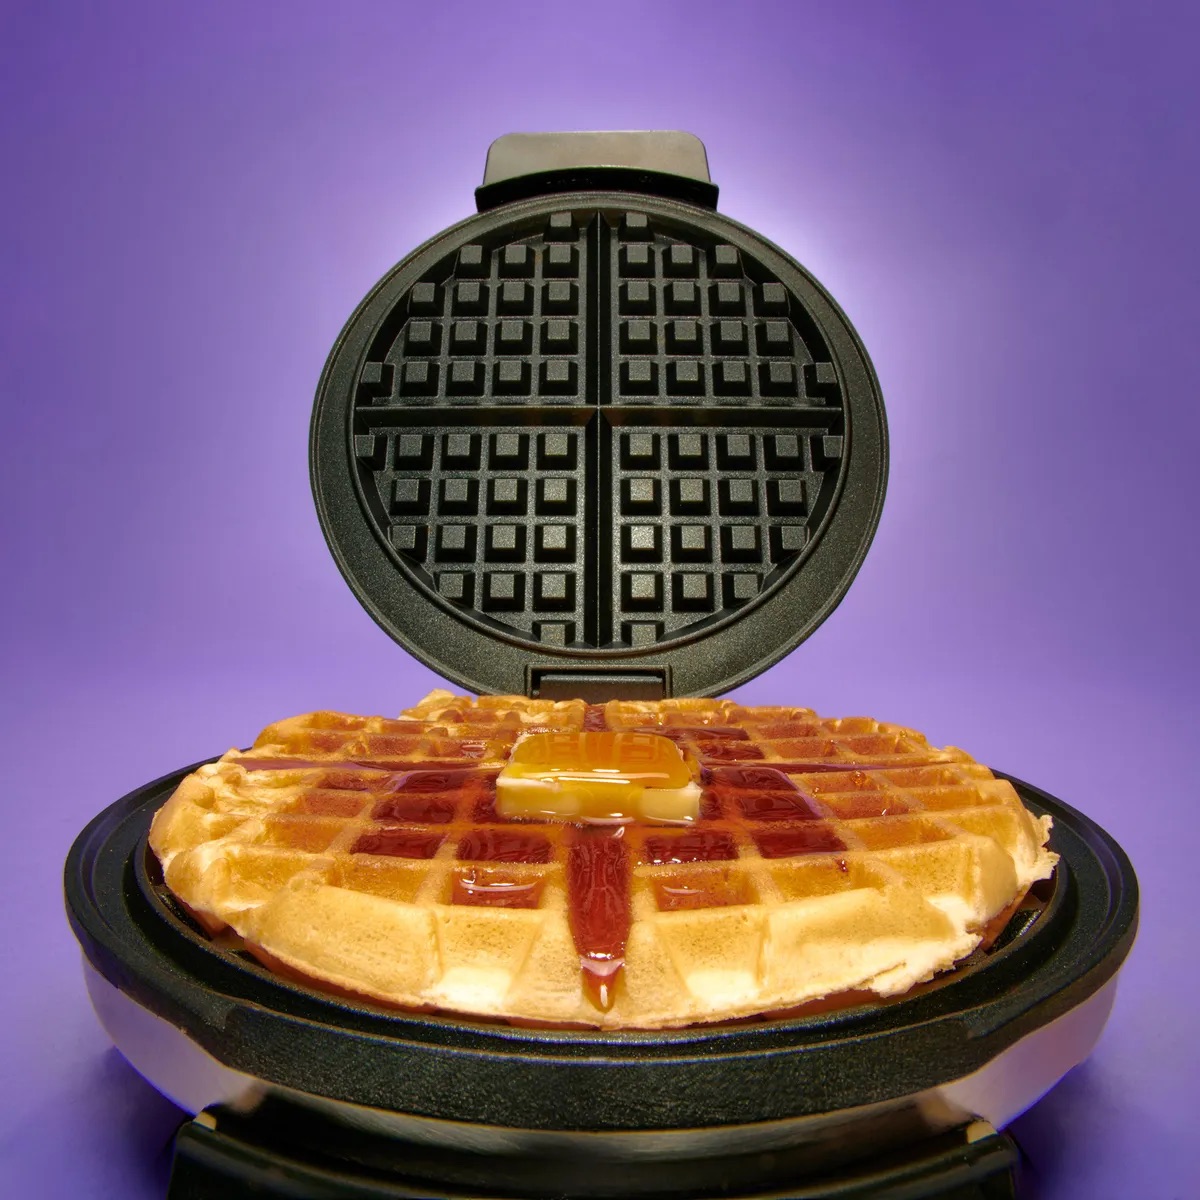 BELLA Classic Rotating Belgian Waffle Maker with Nonstick Plates, Removable  Drip Tray, Adjustable Browning Control and Cool Touch Handles, Stainless